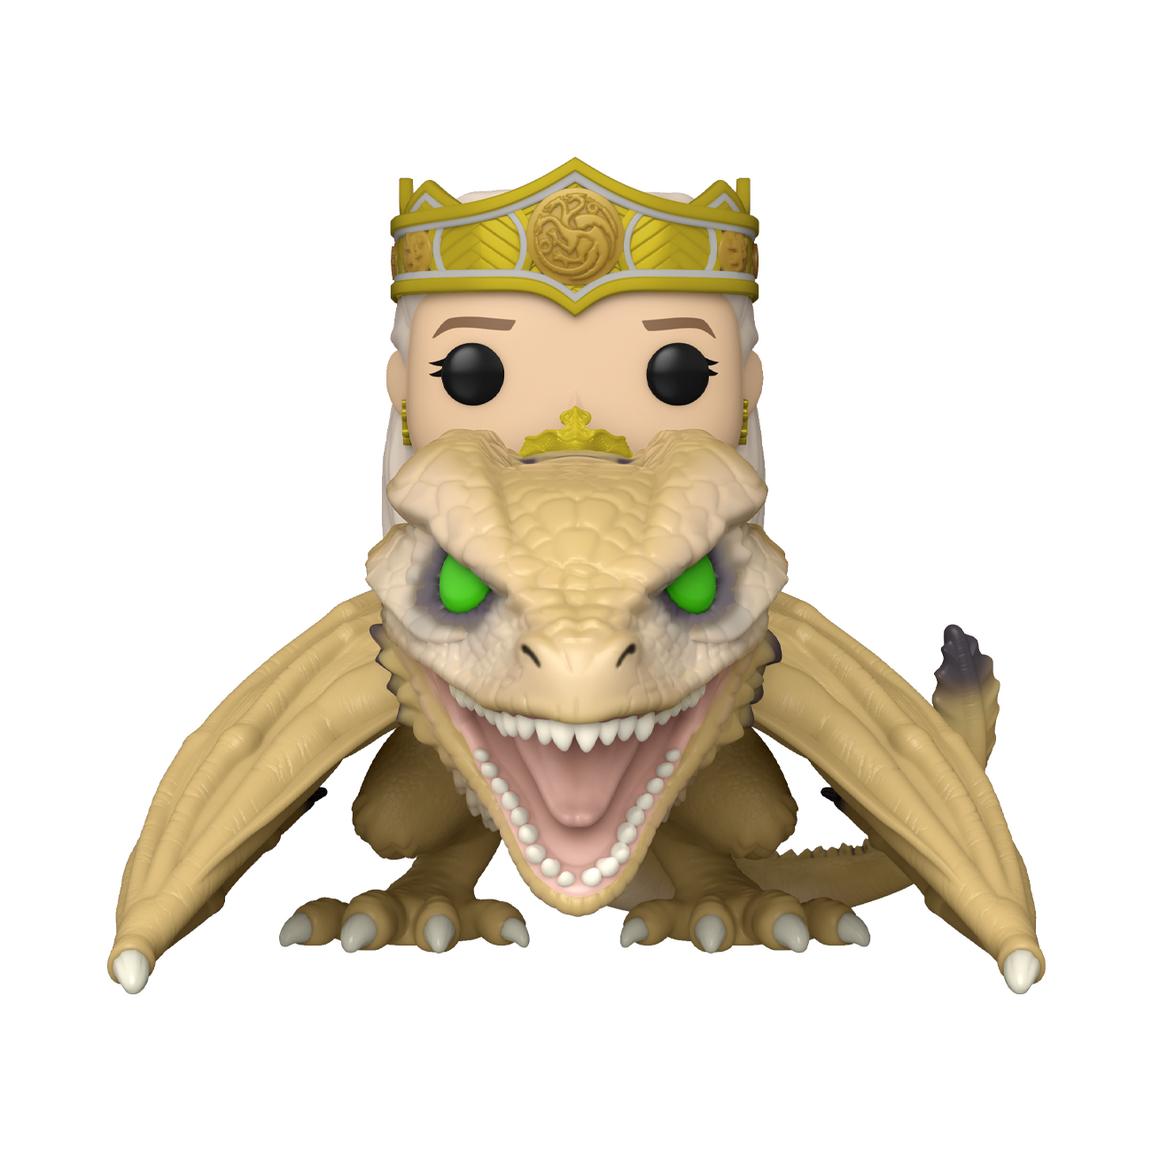 Funko POP Ride Deluxe: Game of Thrones: House of the Dragon Queen Rhaenyra with Syrax 5-in Vinyl Figure